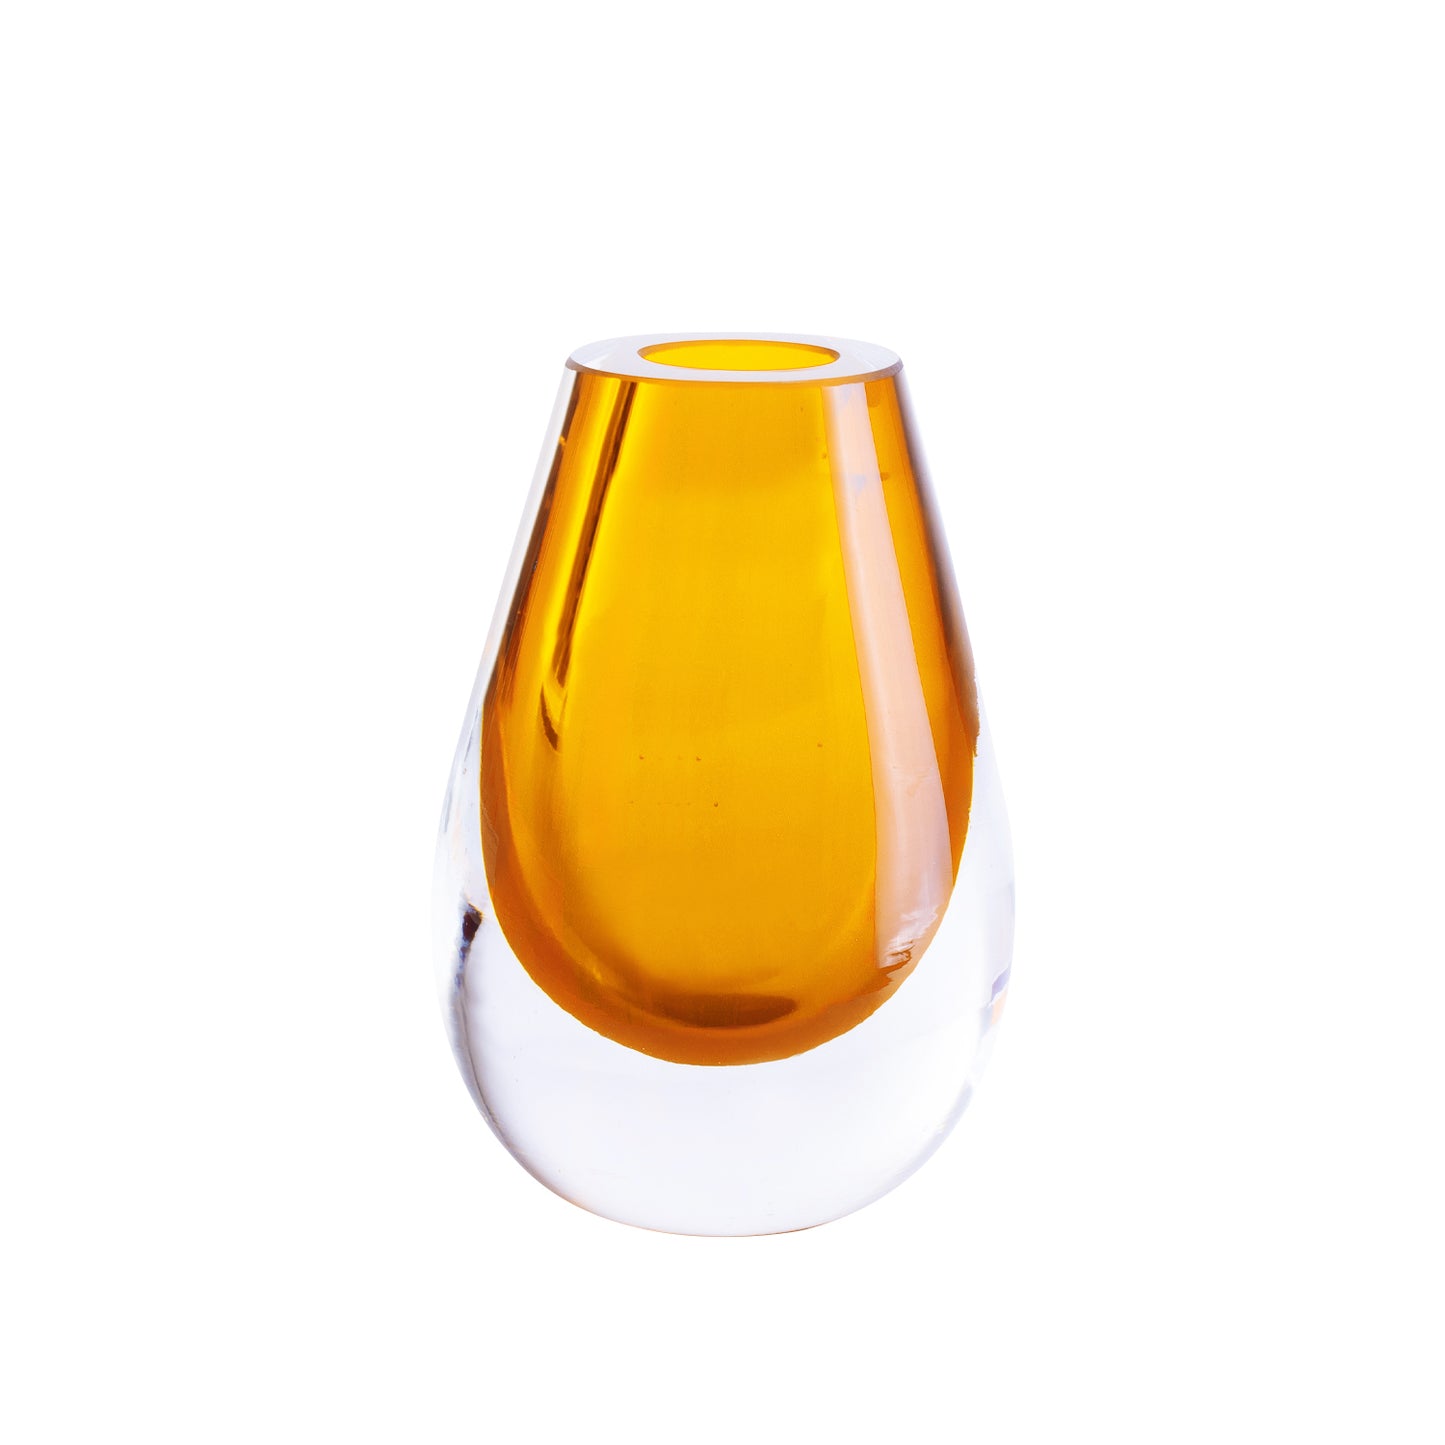 Drop Amber Yellow Vase - Hand-Blown Thick Glass - Eco-Friendly Elegance